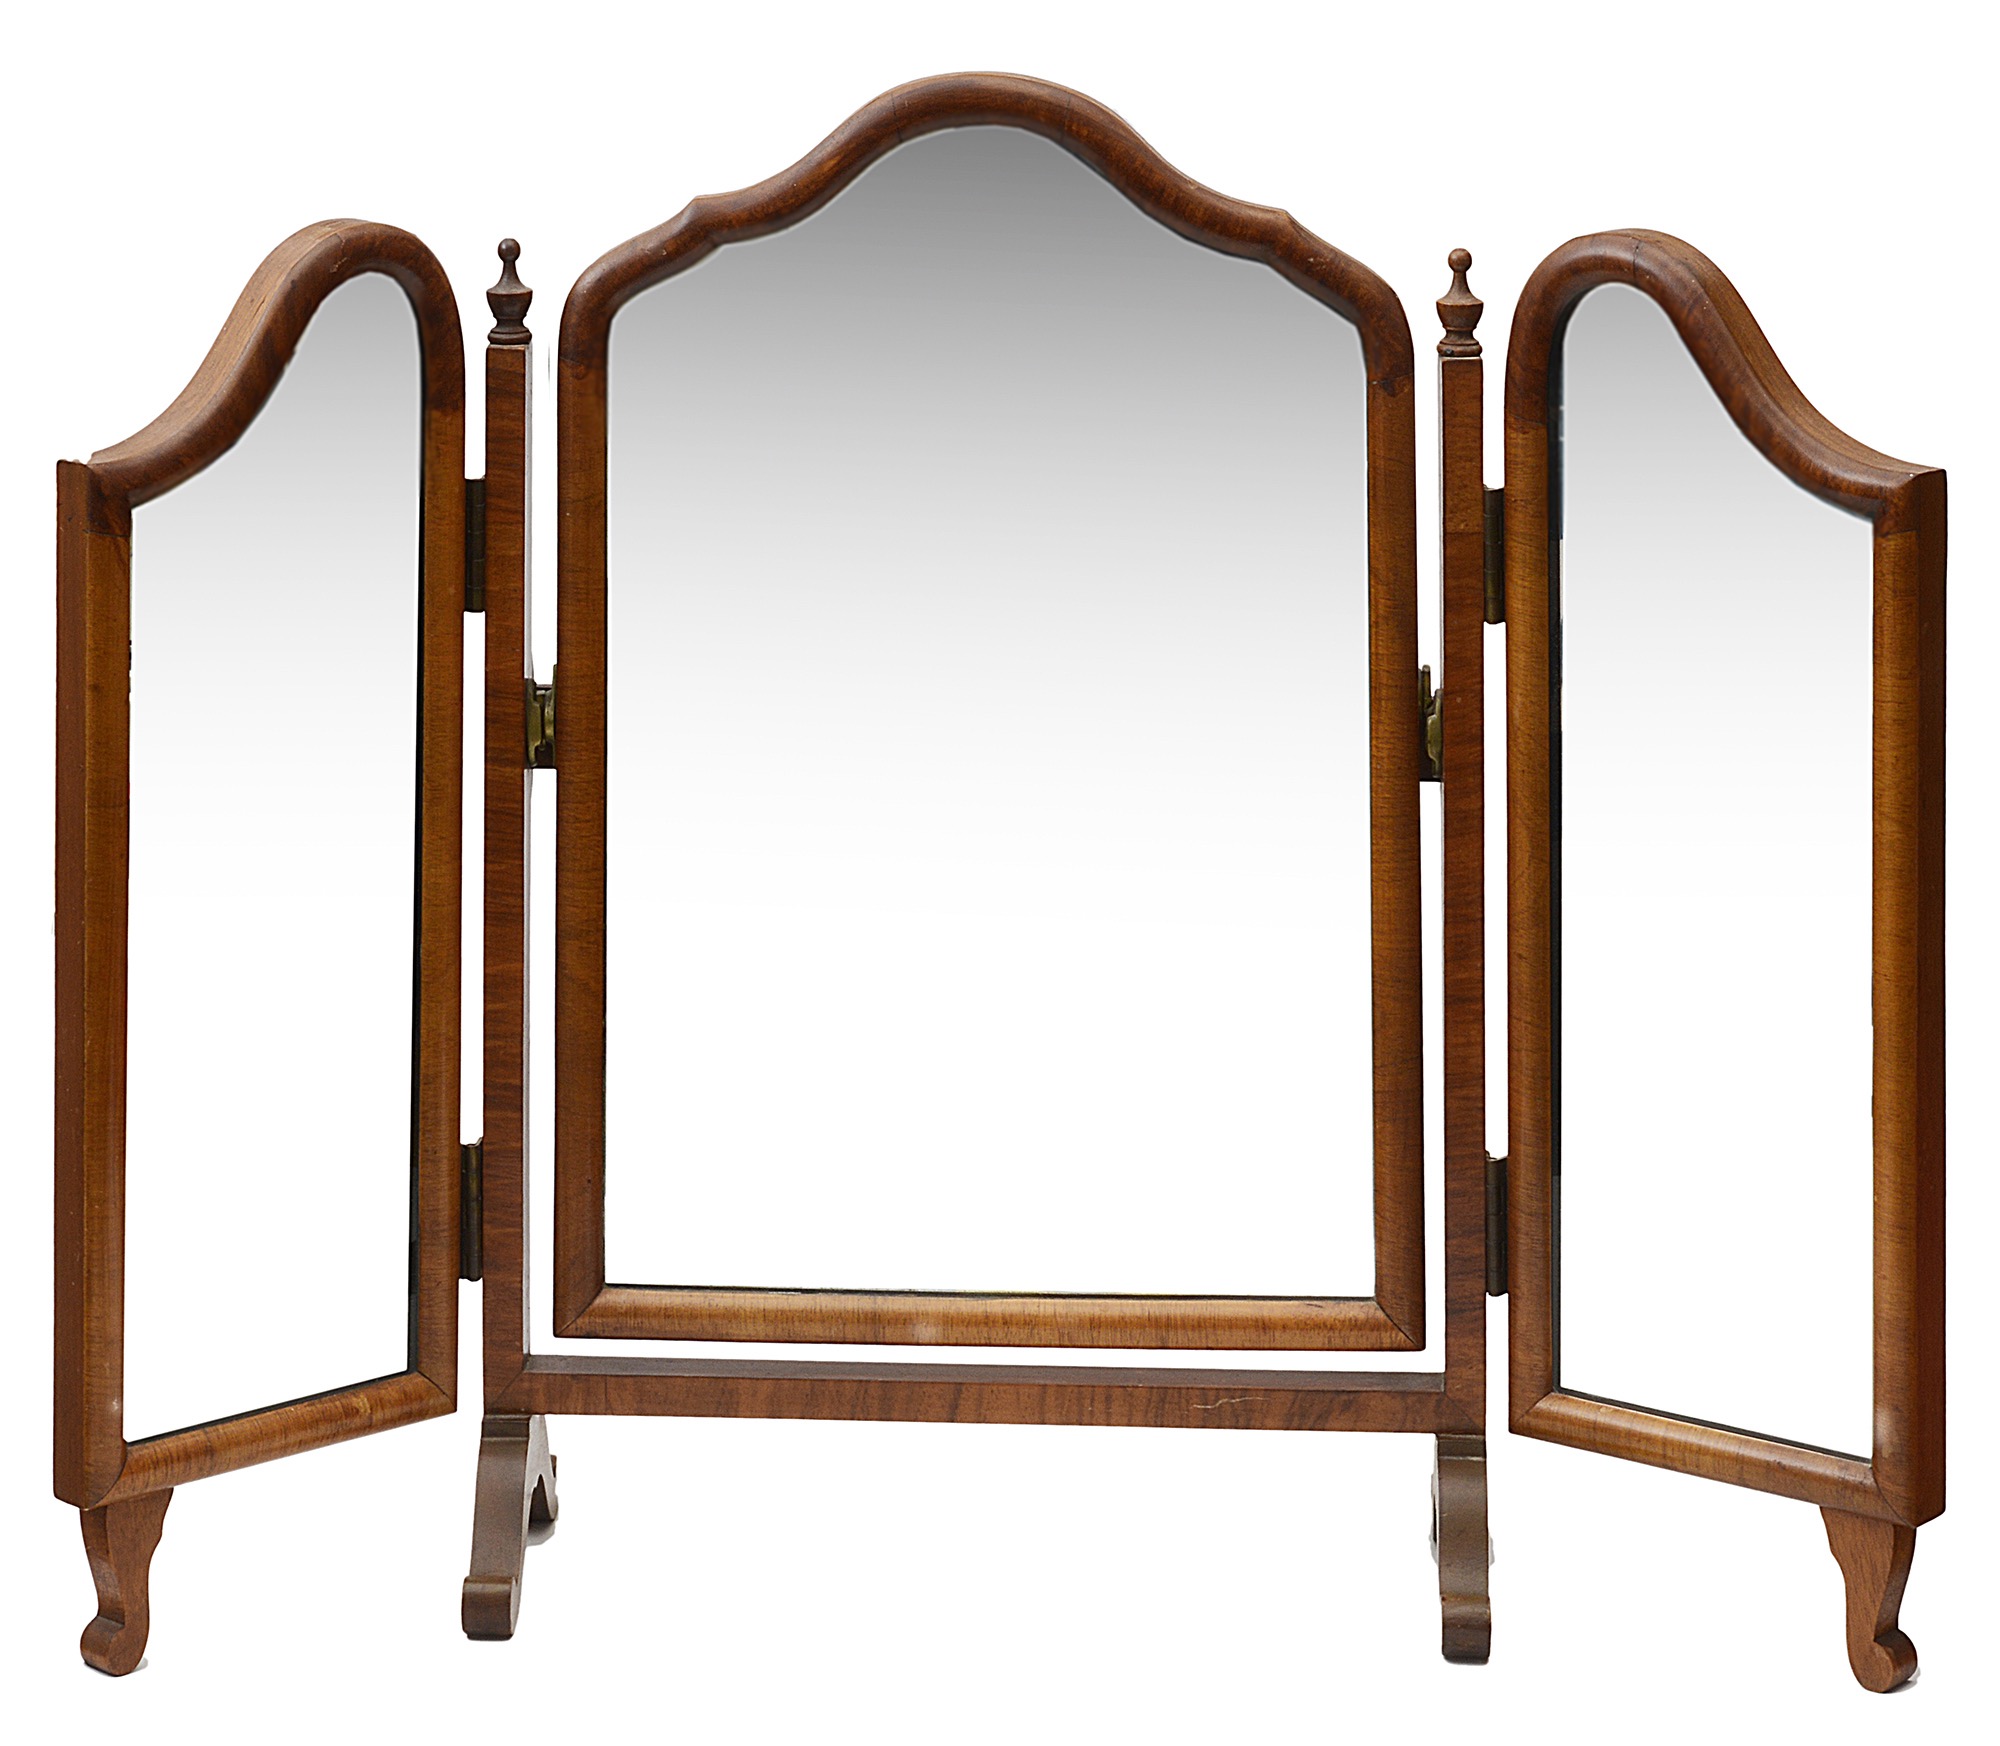 Two early 20th c. Queen Anne style walnut triptych dressing table mirrors, (2) - Image 2 of 2